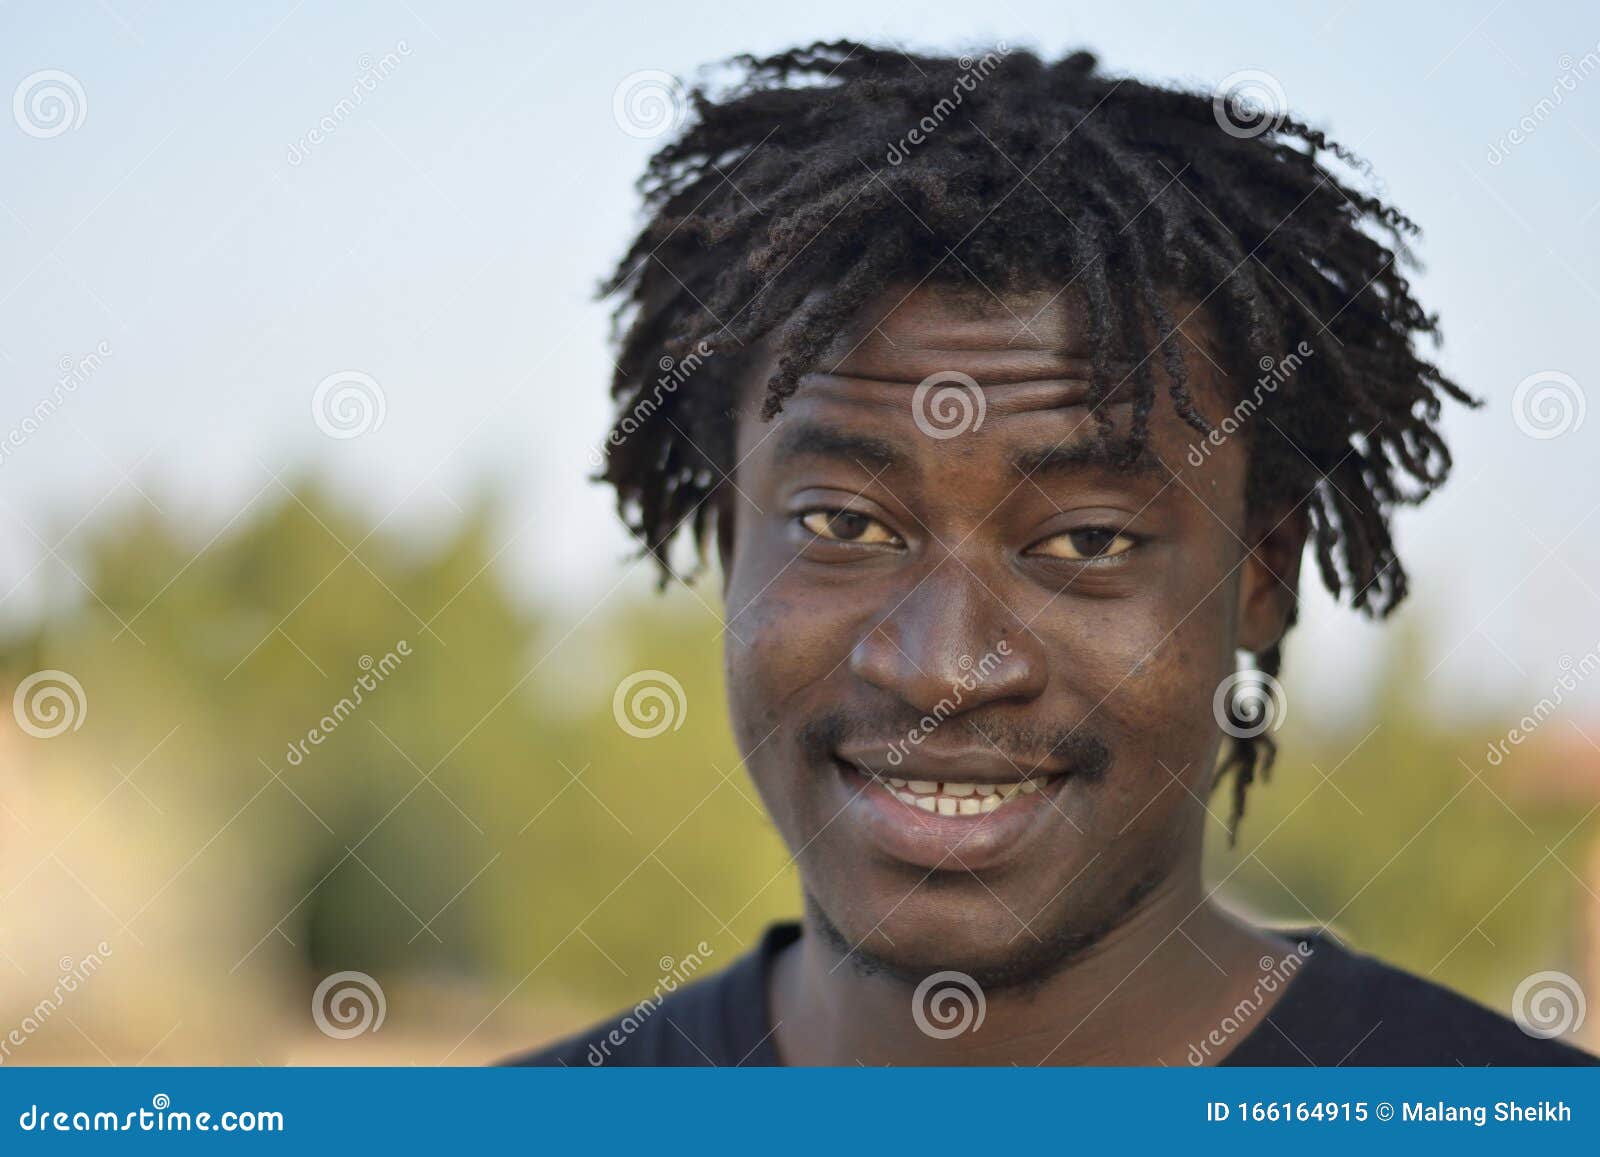 A Dark Skin Handsome African Boy Stock Image - Image of style, living:  166164915